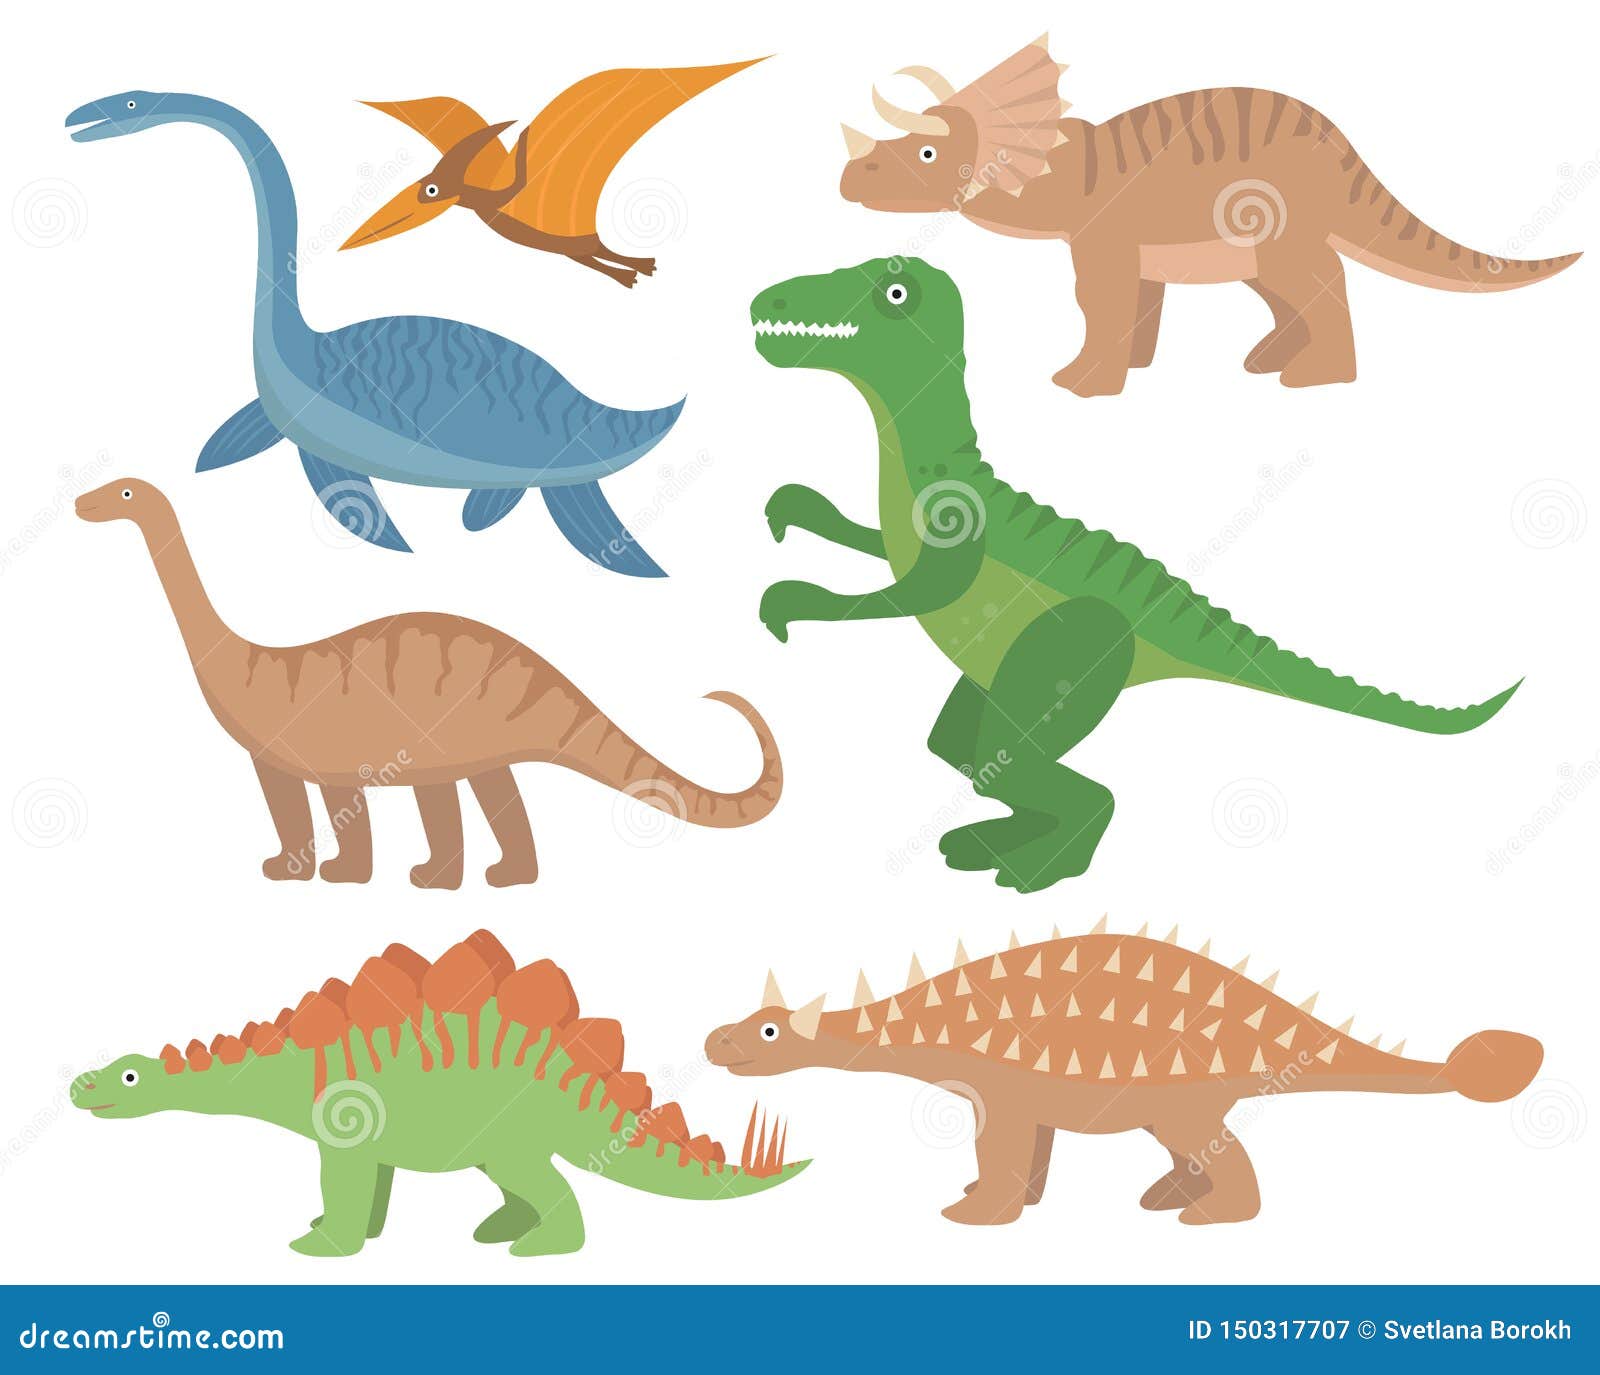 Dinosaurs Flat Icon Set, Cartoon Style. Collection of Objects with ...